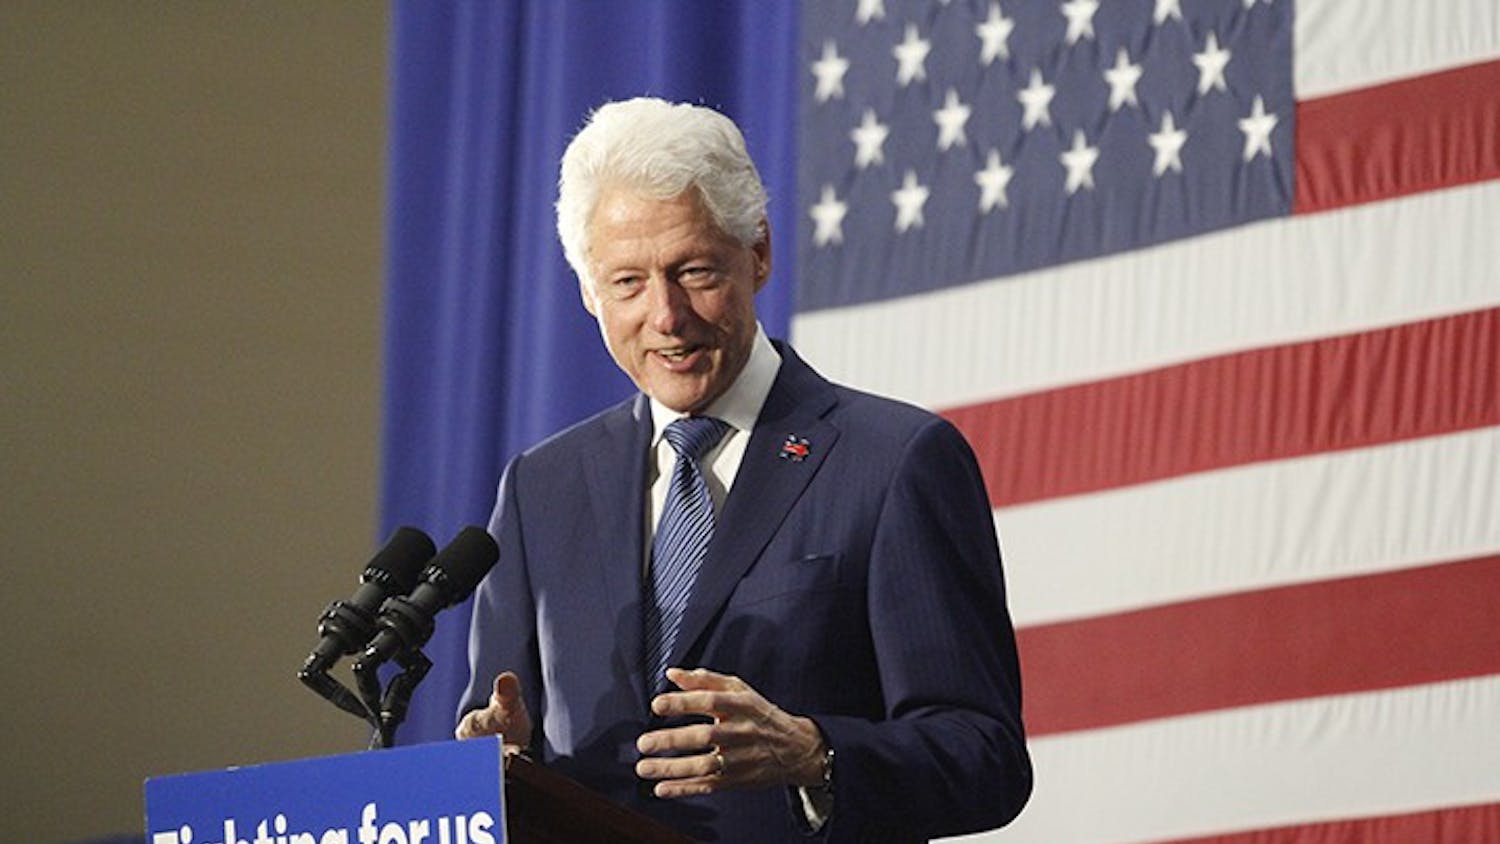 Former president Bill Clinton highlighted the inclusiveness of his wife Hillary Clinton's presidential campaign.